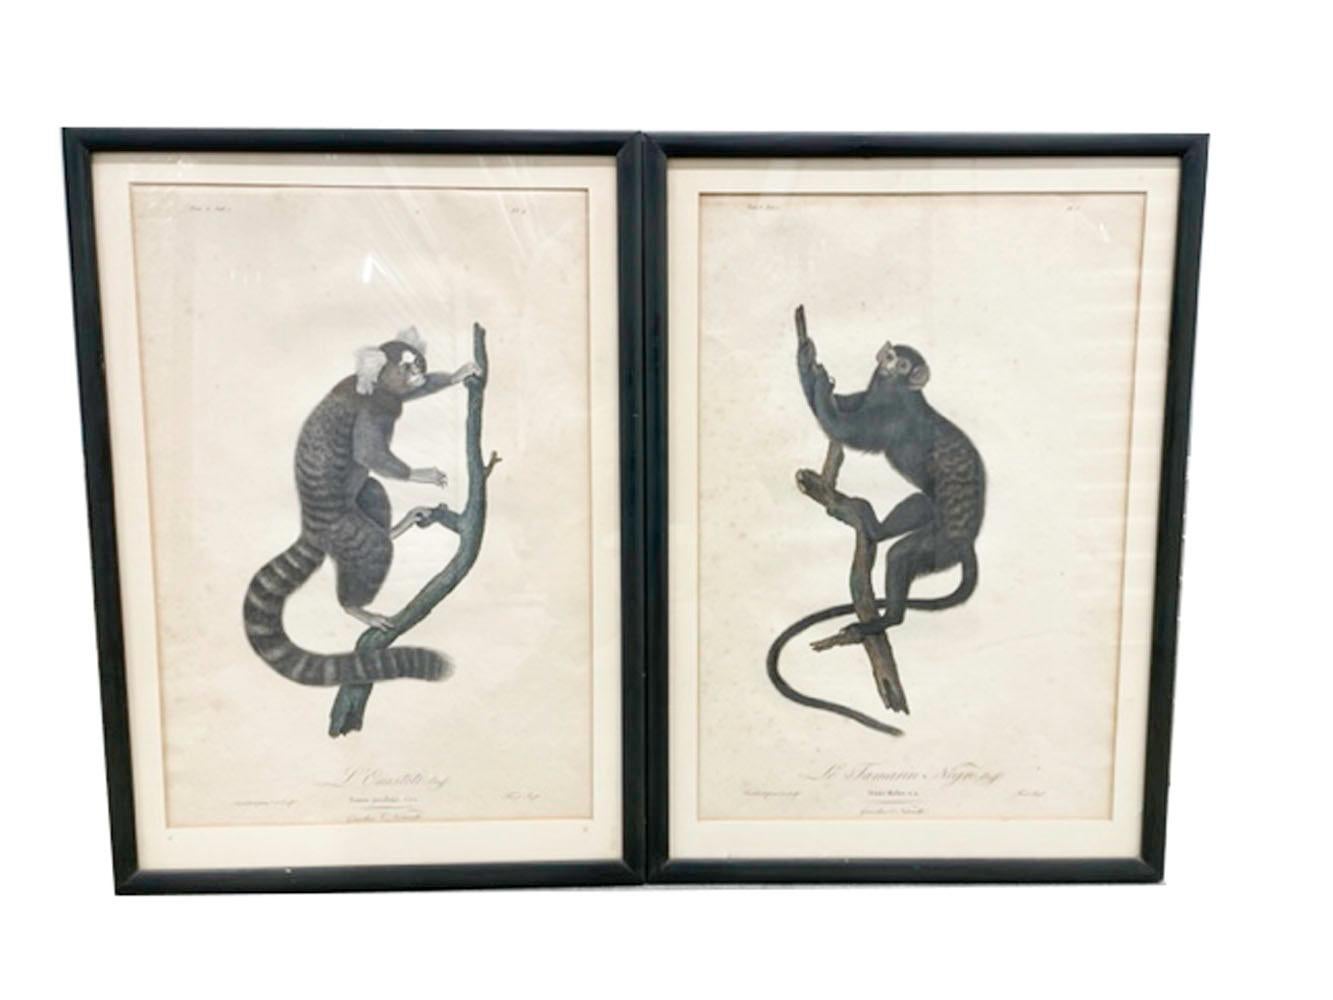 Group of four hand-colored engravings of monkeys by Jean-Baptiste Audebert (1759-1800), from his 'Histoire naturelle des singes', which included 62 images drawn and engraved by himself. Audebert devised a method to color the prints which was